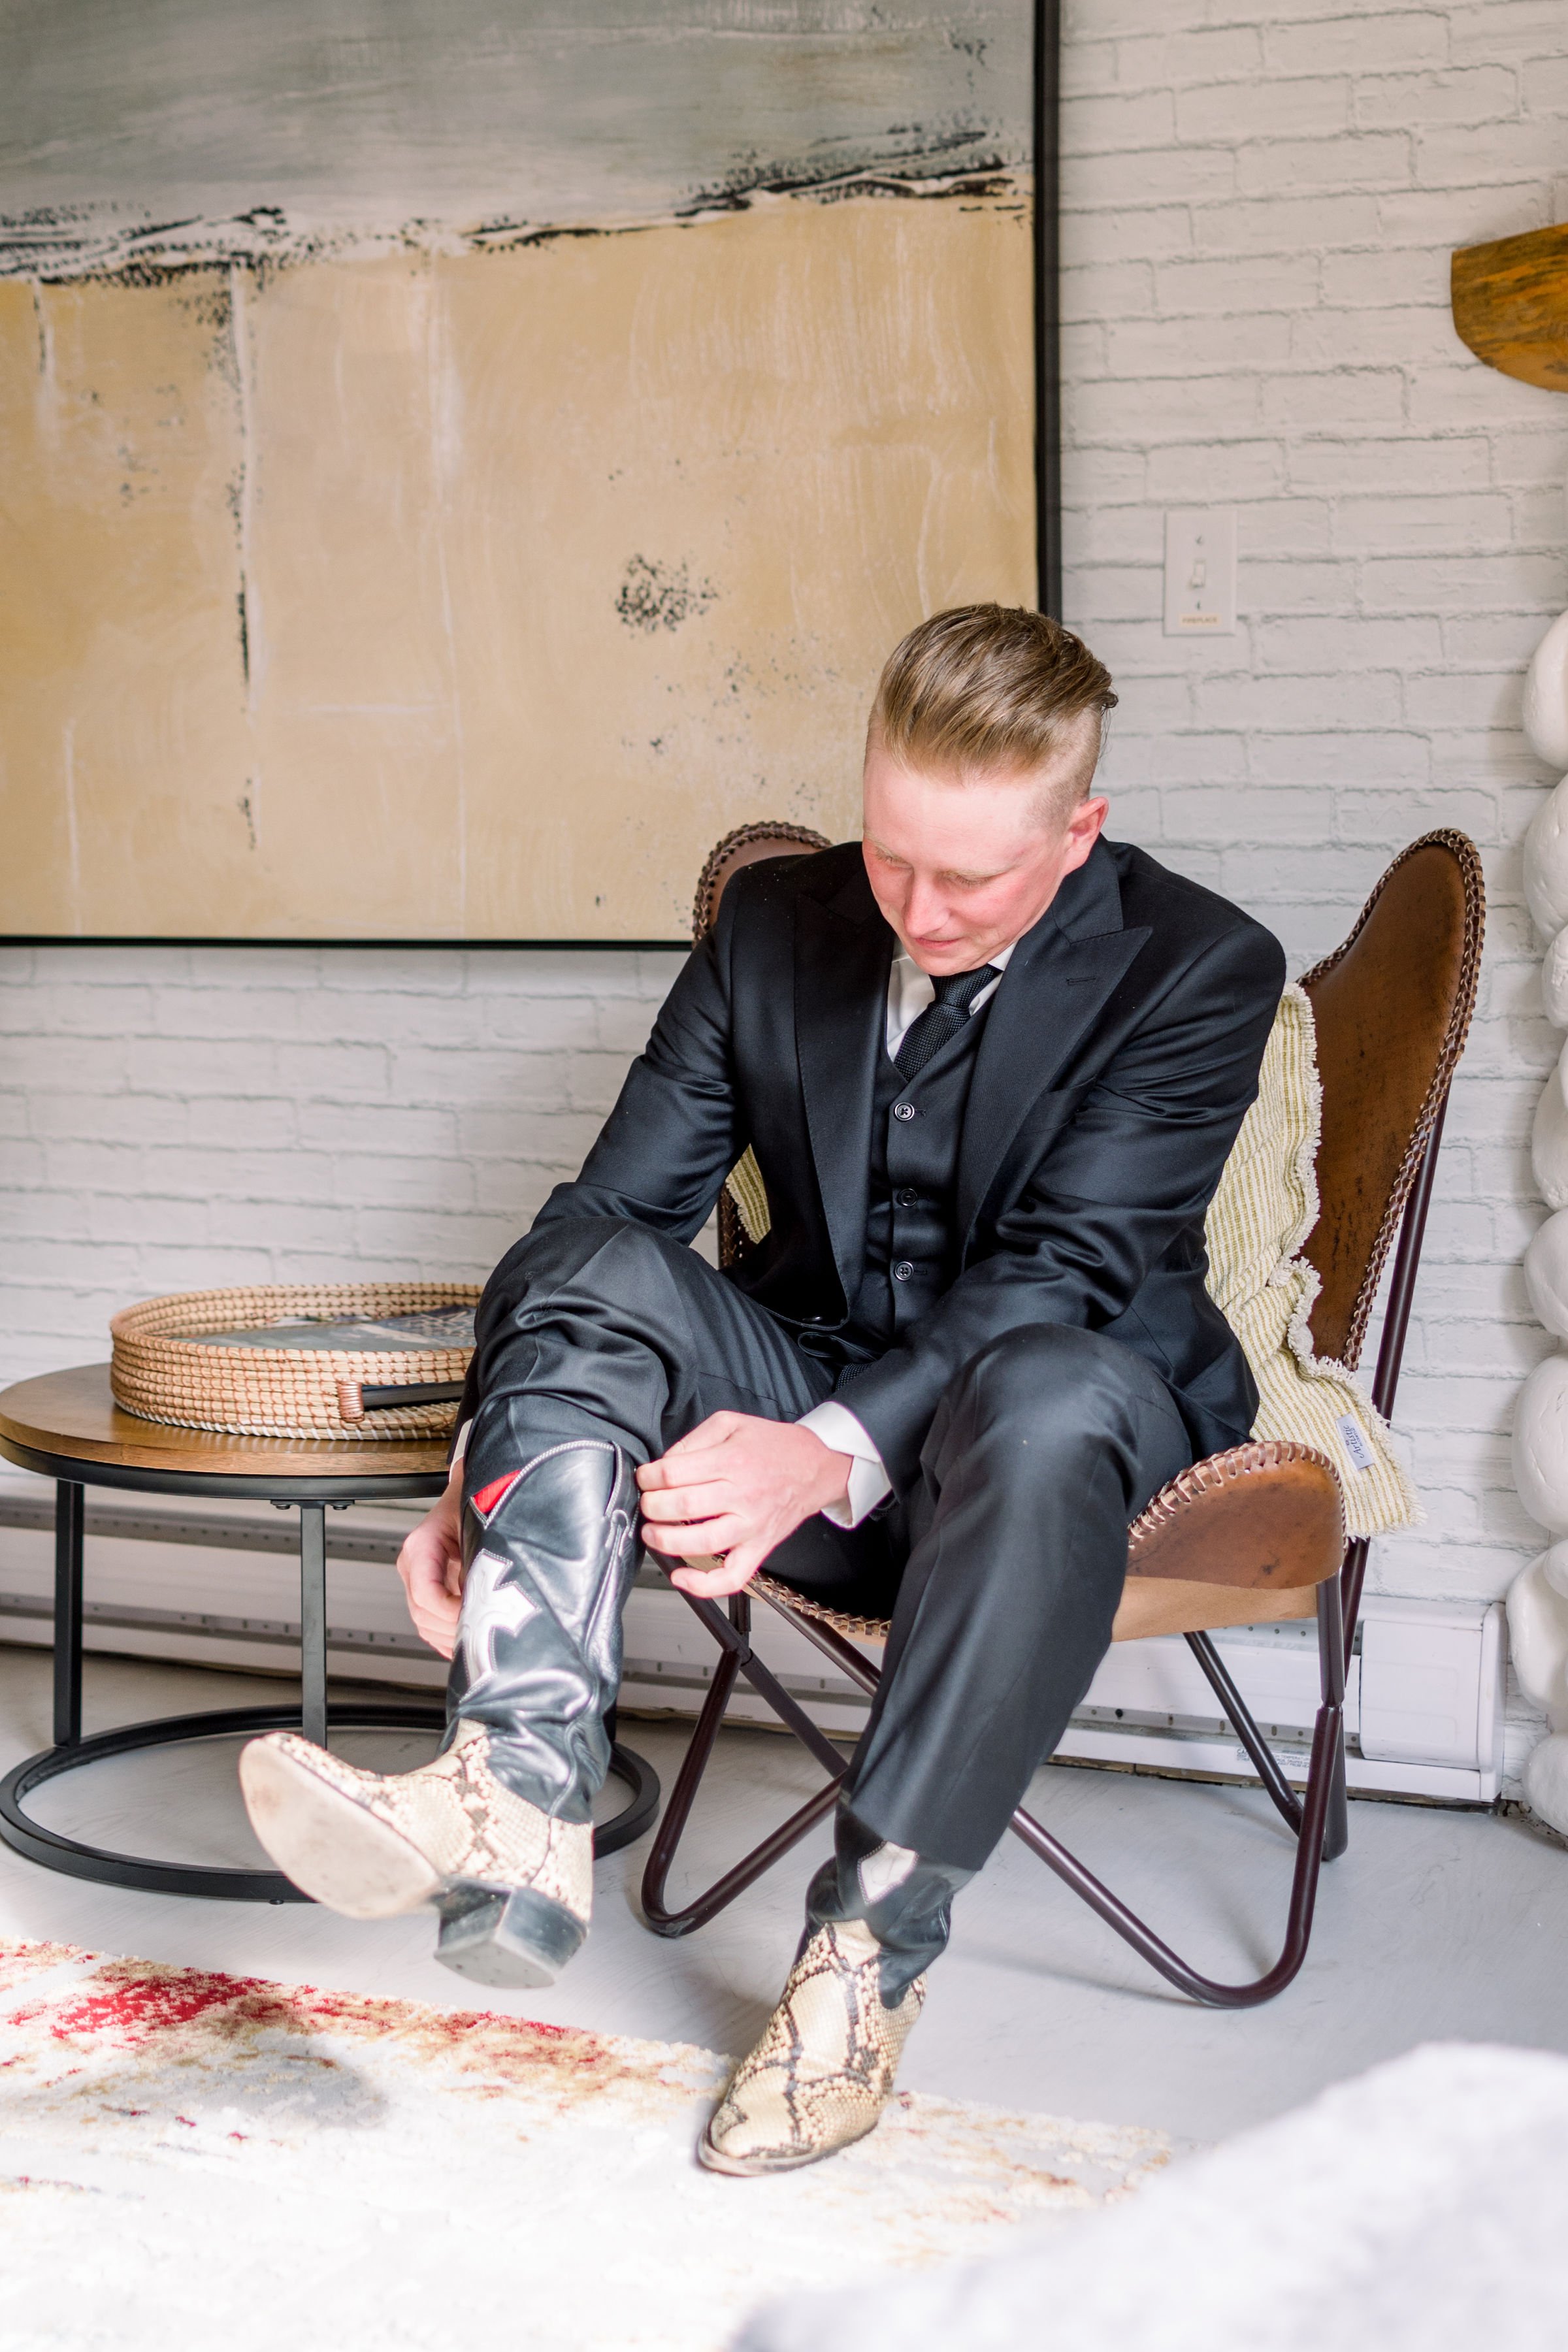  A groom puts on his cowboy boots on his wedding day at the Silvertip Golf Course by Chelsea Mason Photography. cowboy wed #Albertaweddings #shesaidyes #Albertaweddingphotographers #SilvertipGolfCourse #ChelseaMasonPhotography #ChelseaMasonWeddings  